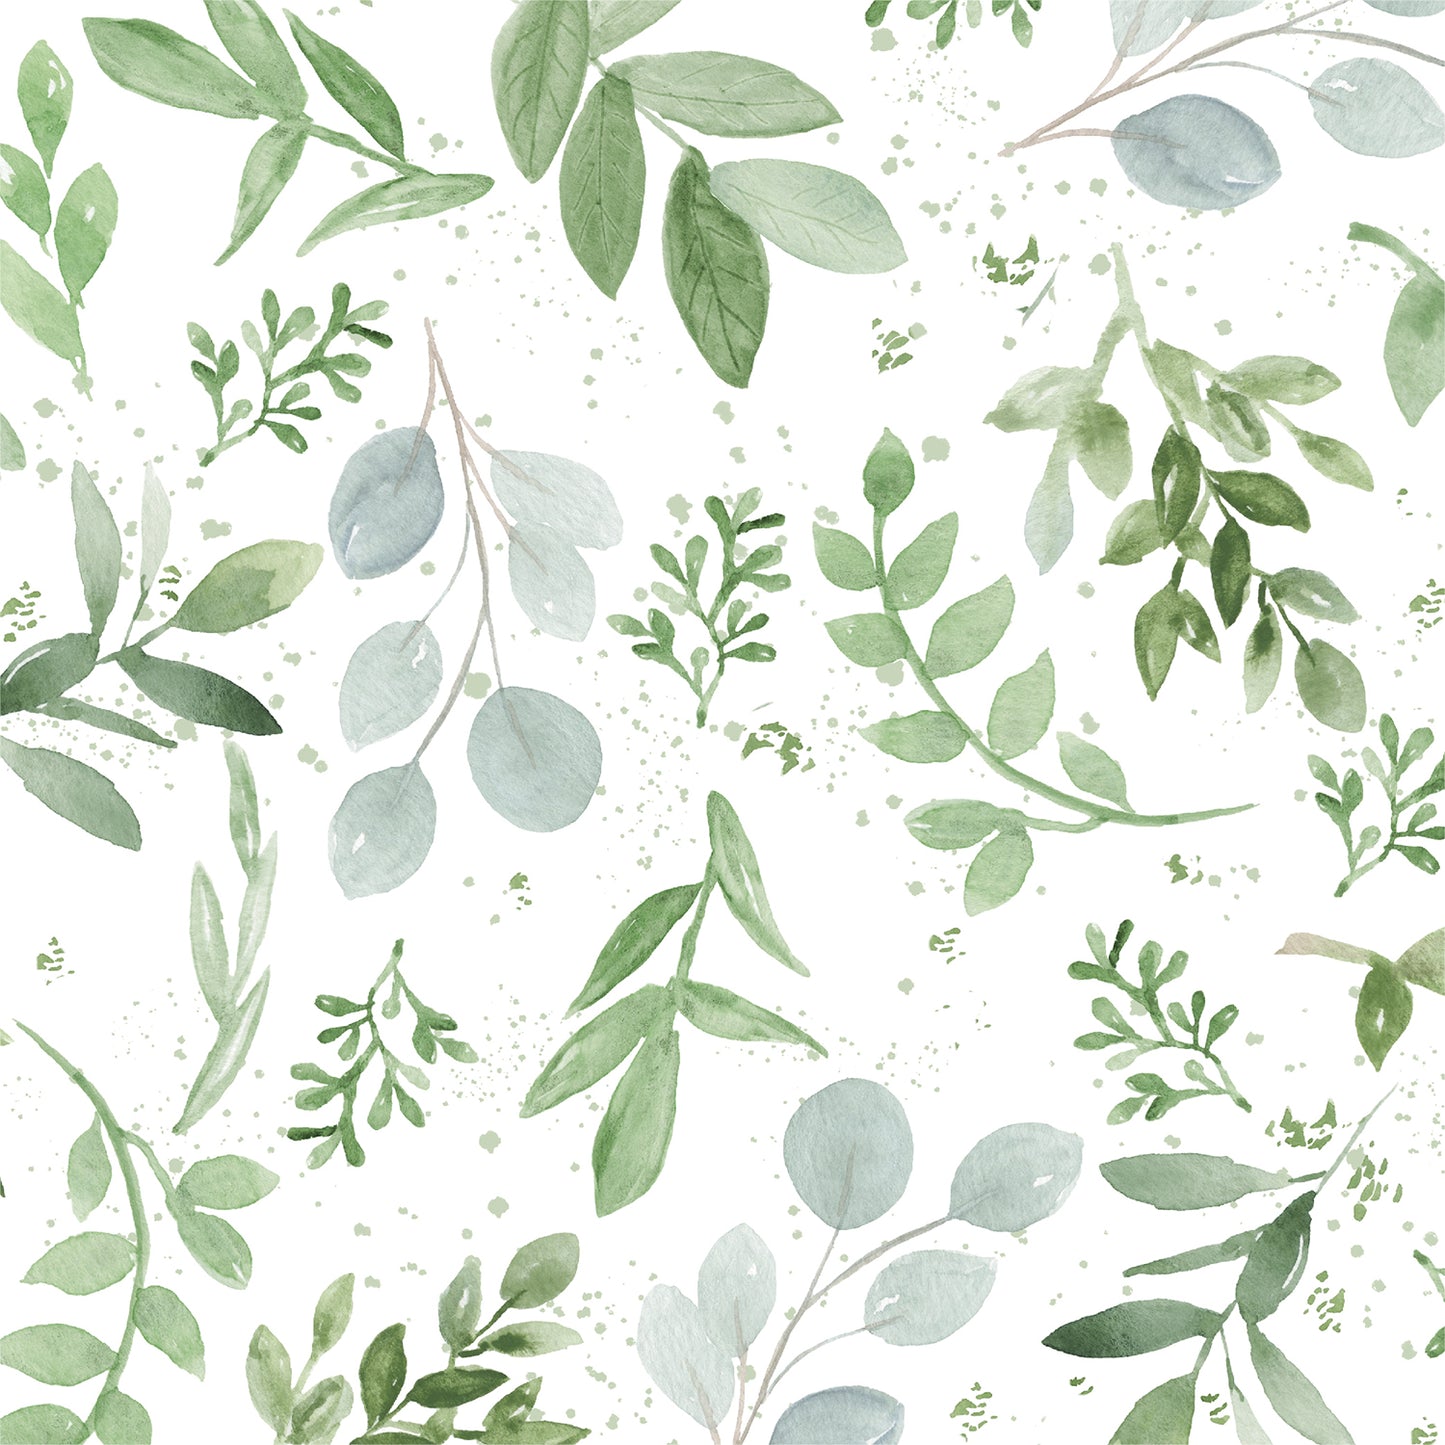 Watercolor Green Leaves Flat Wrapping Paper Sheet Wholesale Wraphaholic